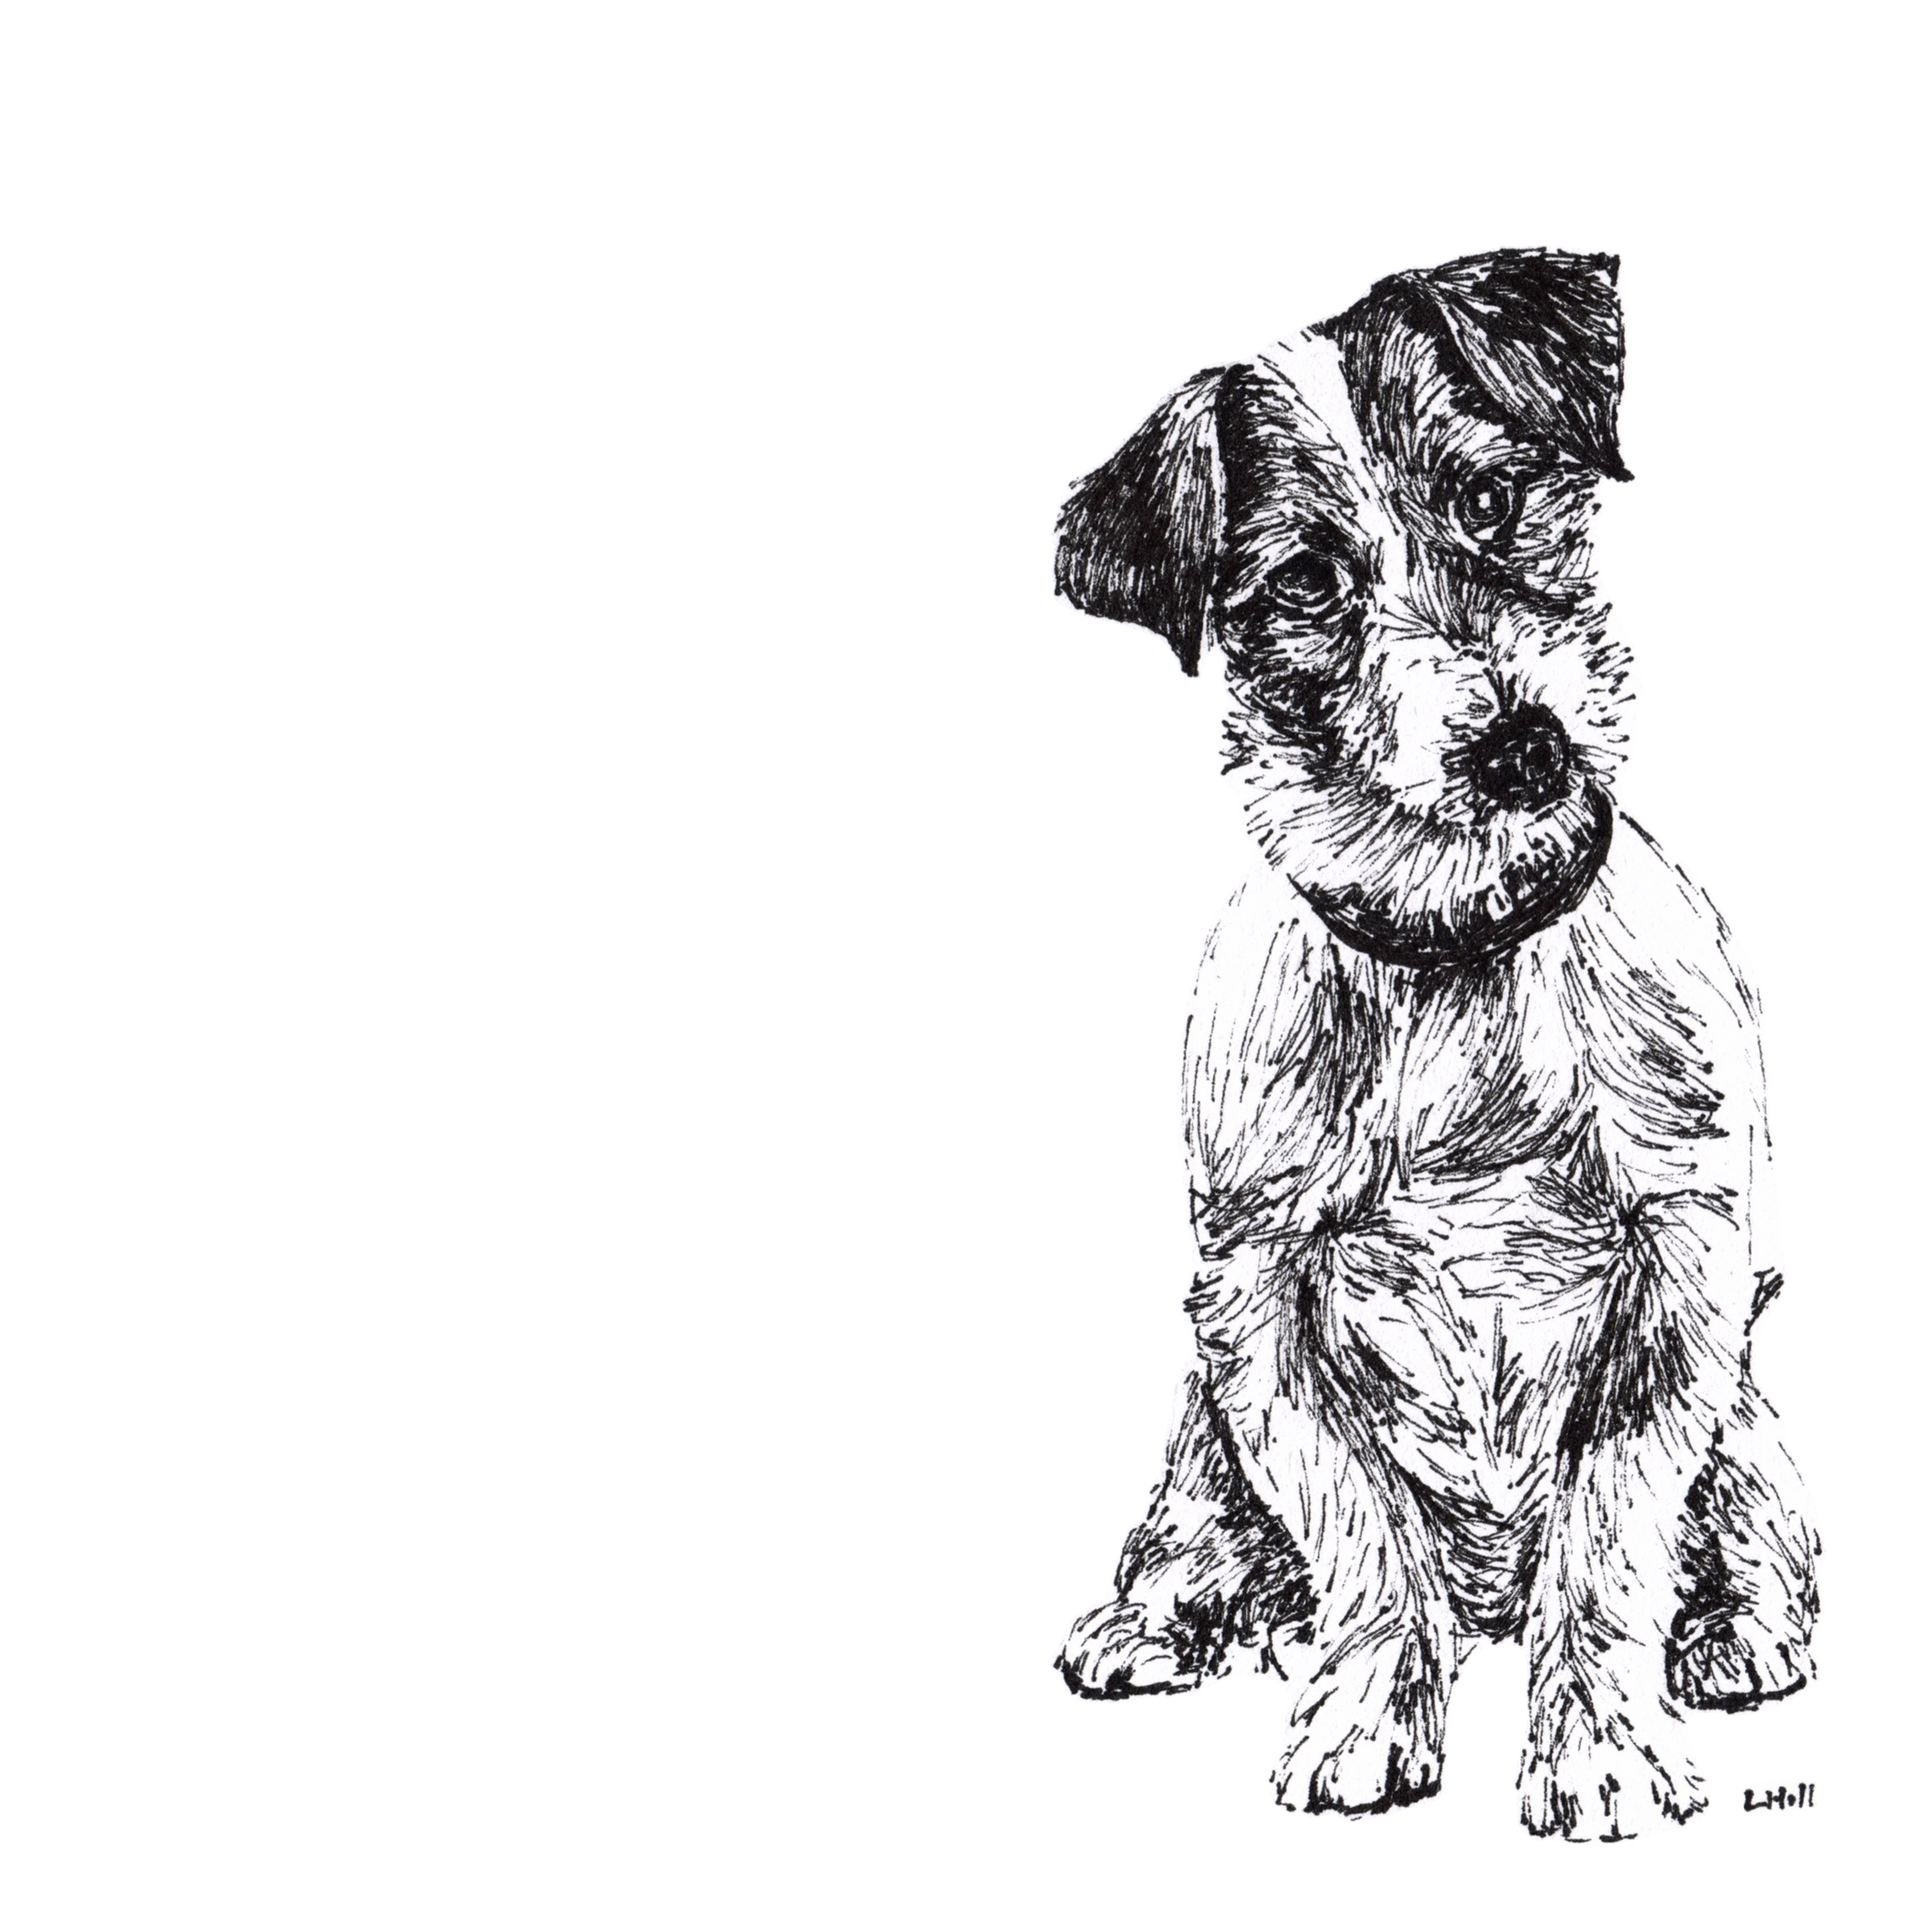 Jack Russell Terrier pen and ink illustration by Louisa Hill